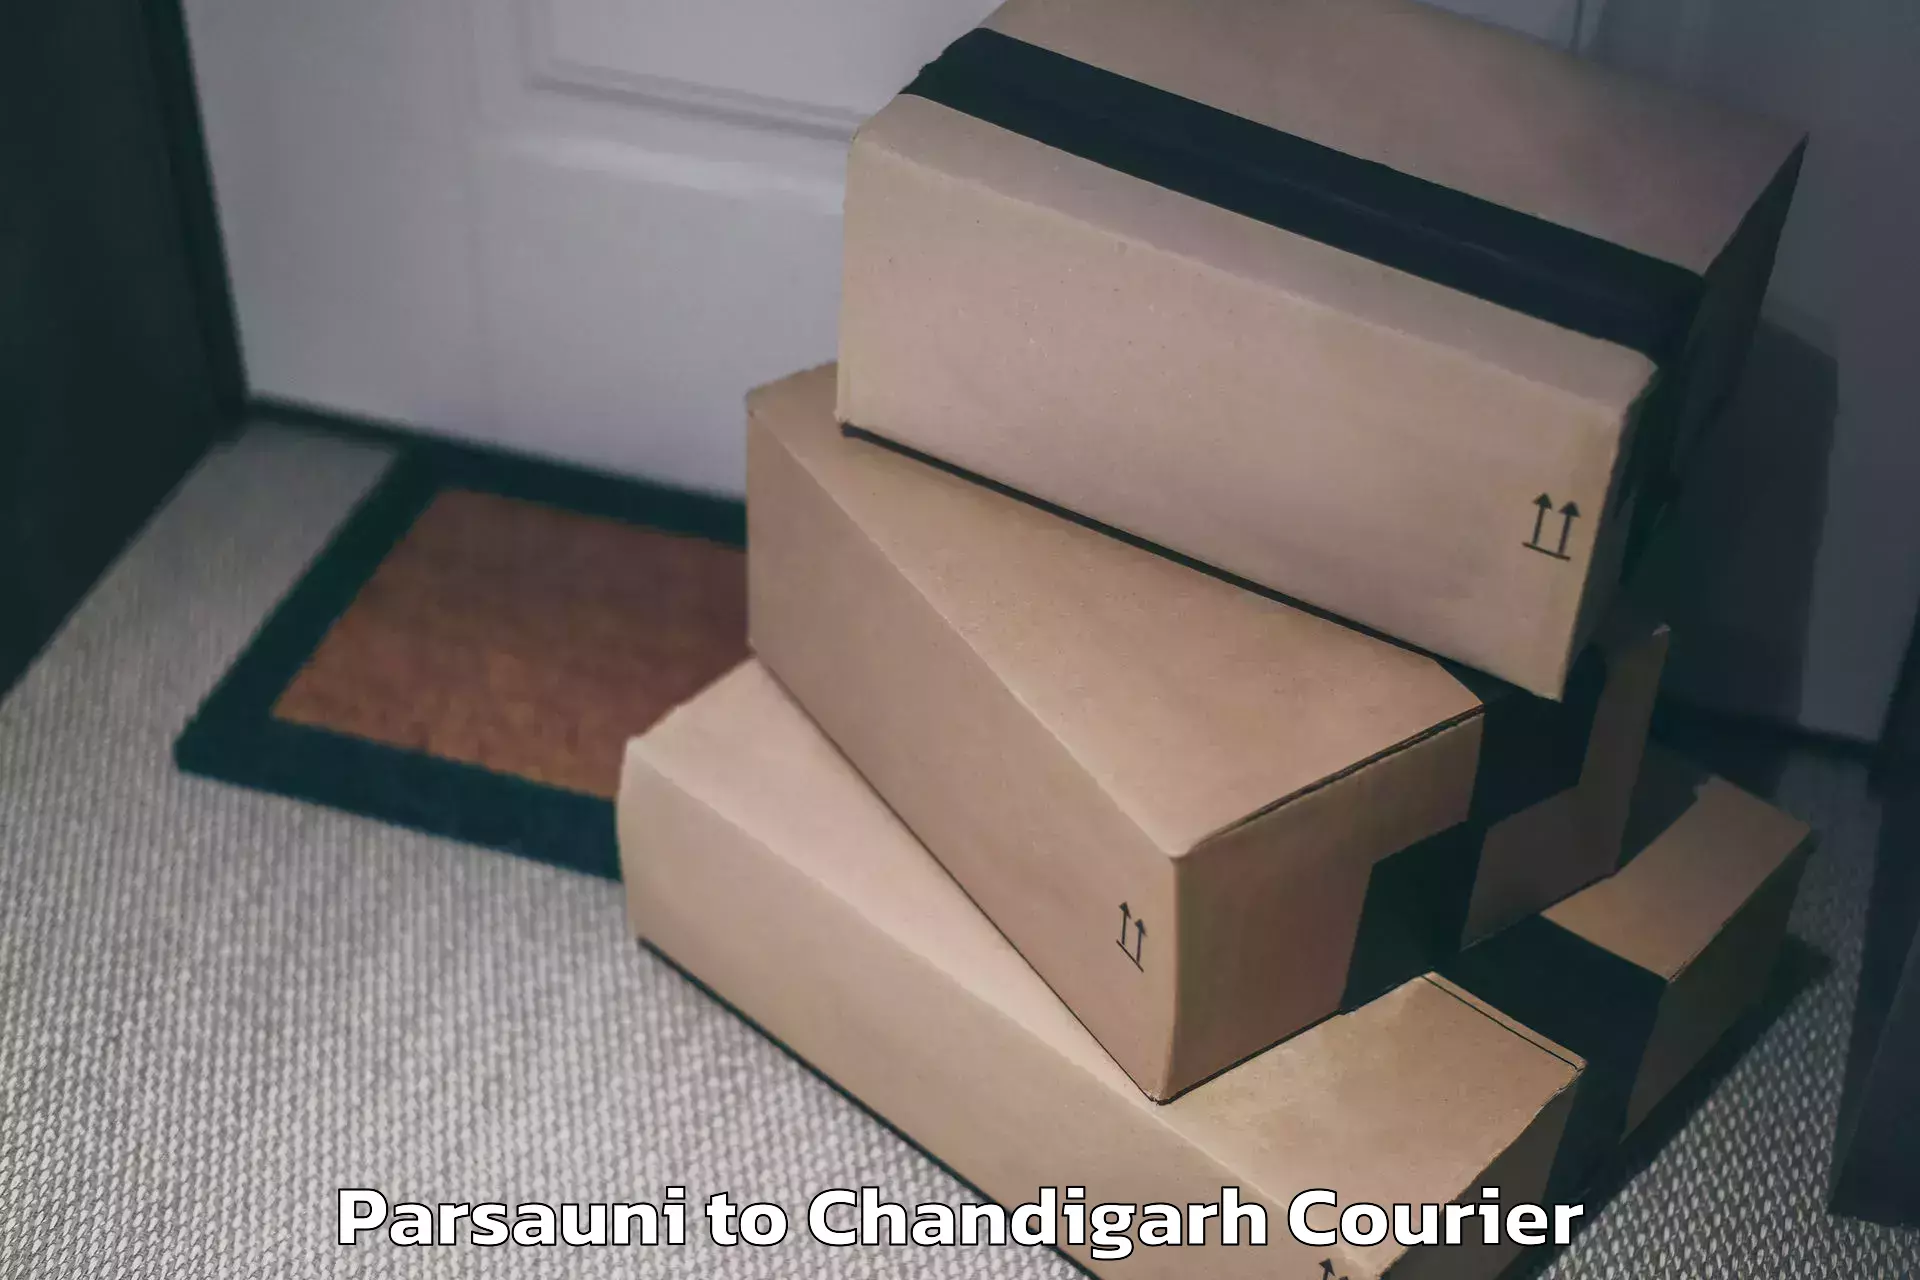 Baggage shipping service Parsauni to Chandigarh